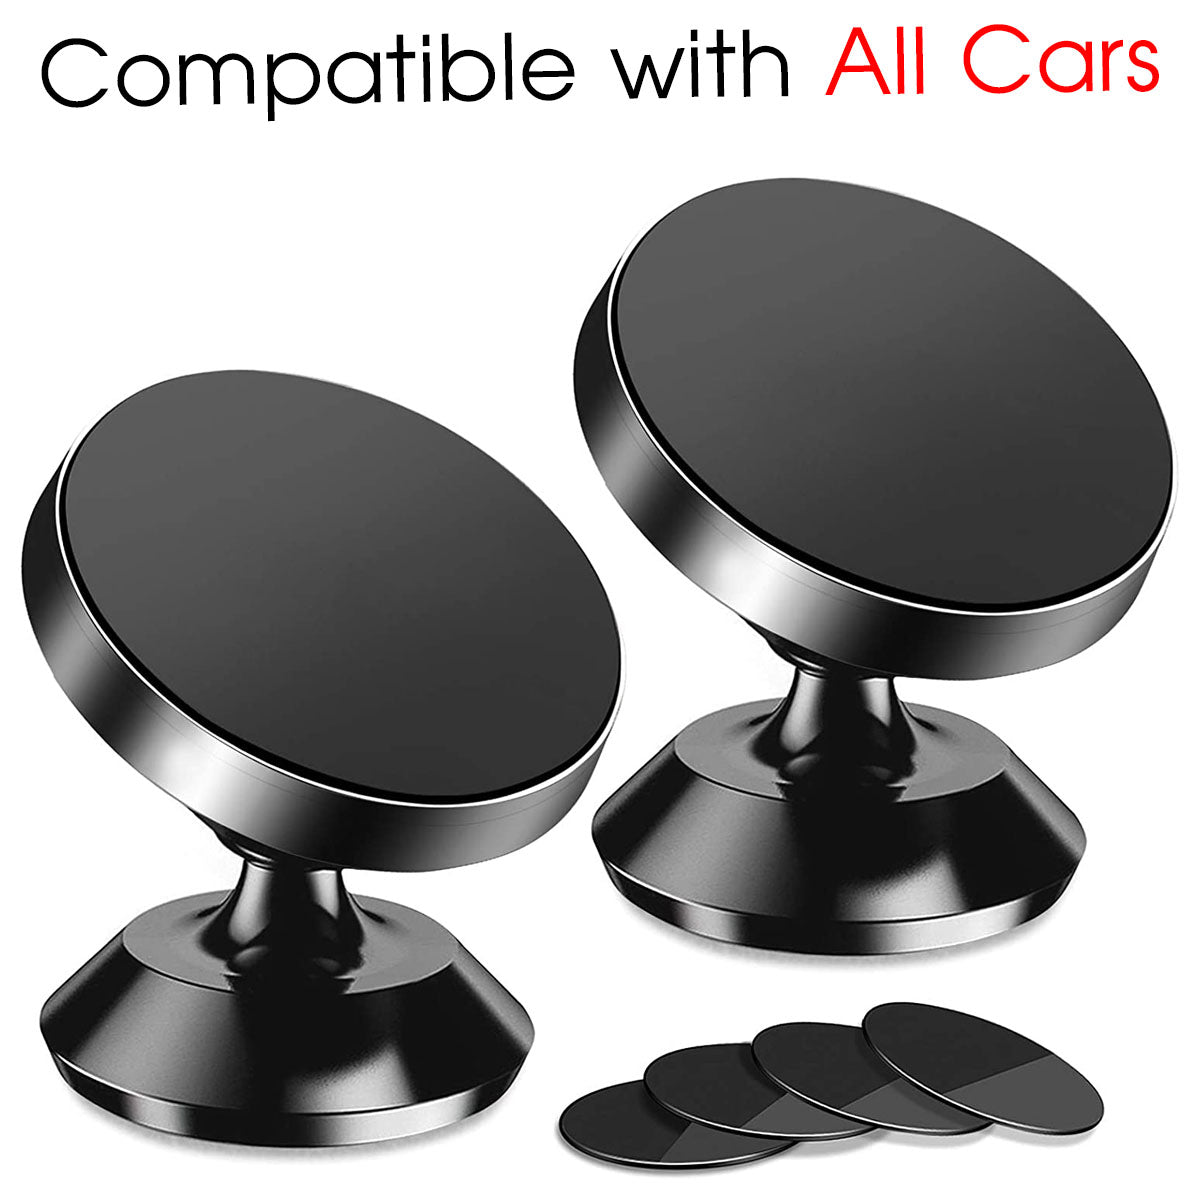 [2 Pack ] Magnetic Phone Mount, Custom For Your Cars, [ Super Strong Magnet ] [ with 4 Metal Plate ] car Magnetic Phone Holder, [ 360° Rotation ] Universal Dashboard car Mount Fits All Cell Phones, Car Accessories JG13982